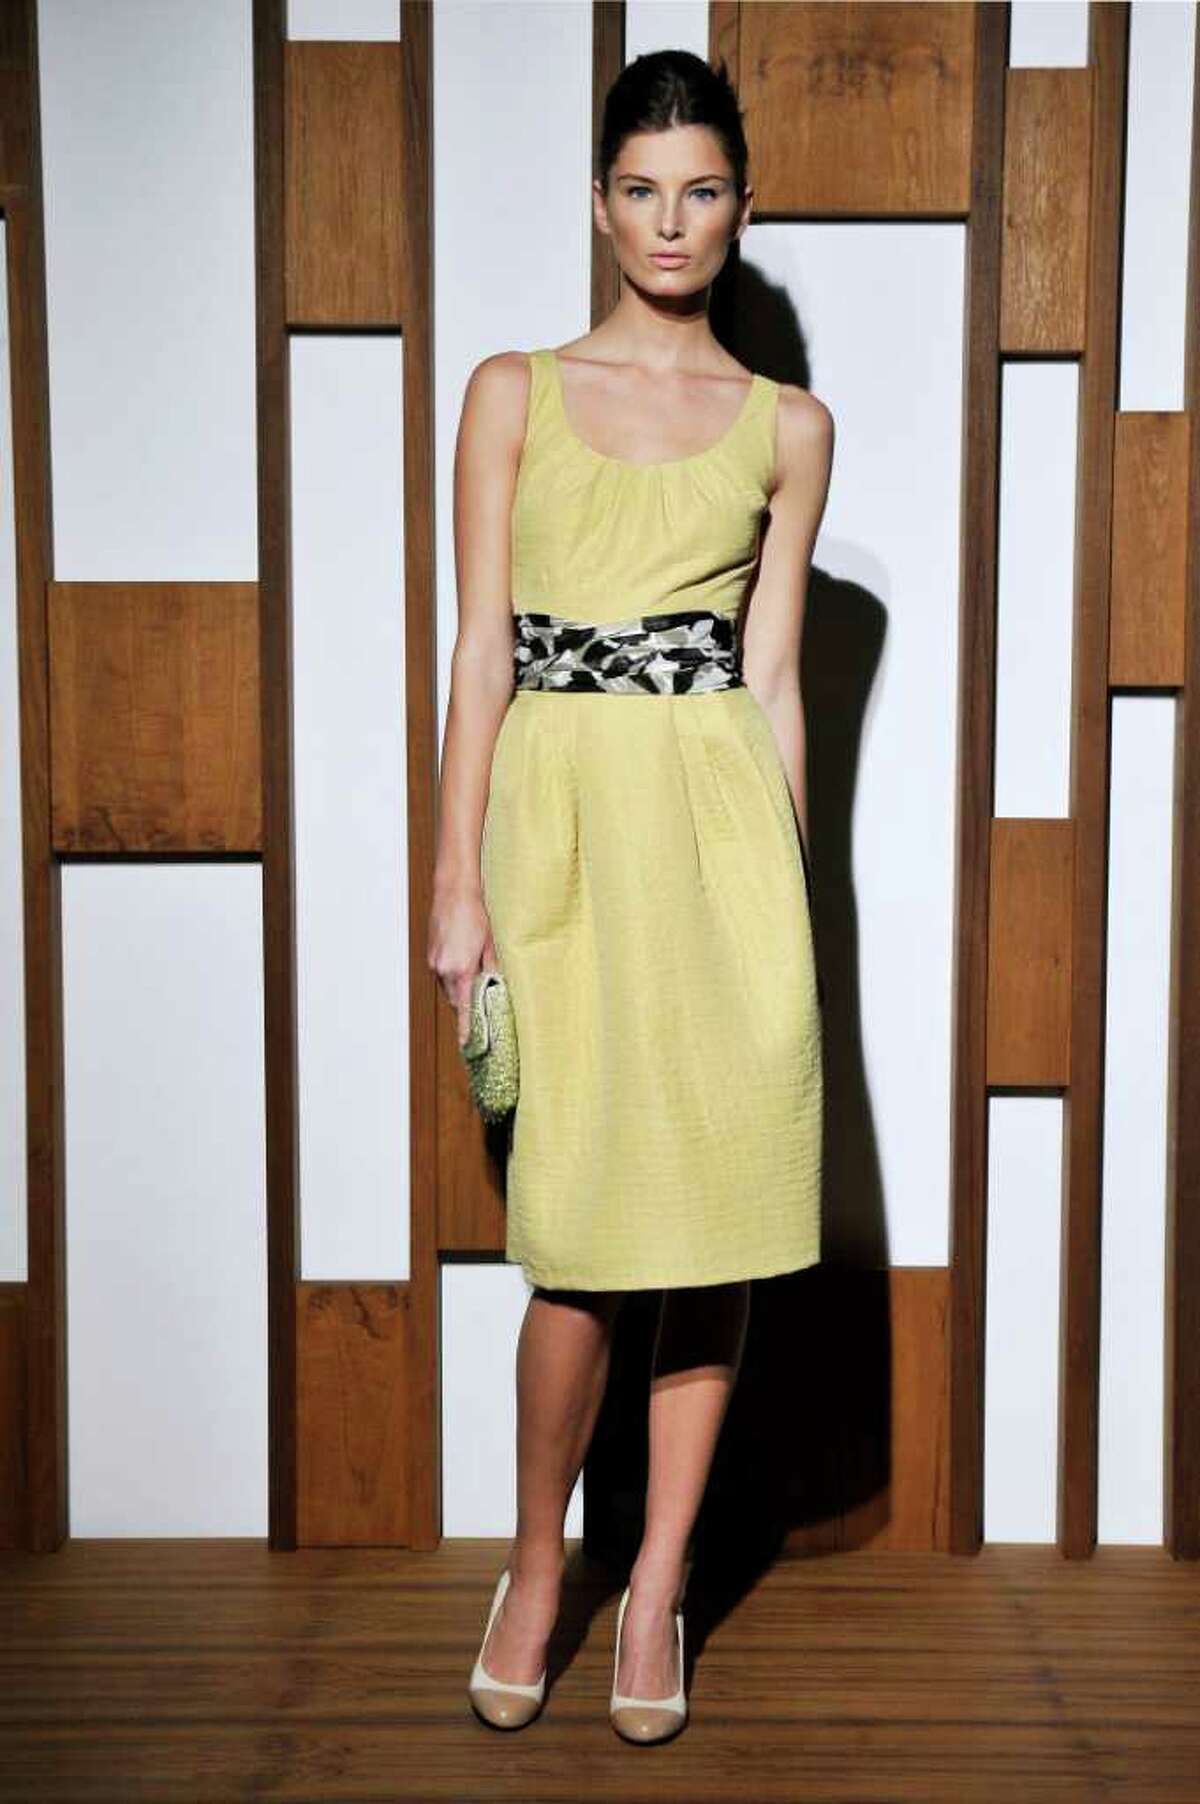 Banana Republic offers a pale yellow sheath dress for spring.